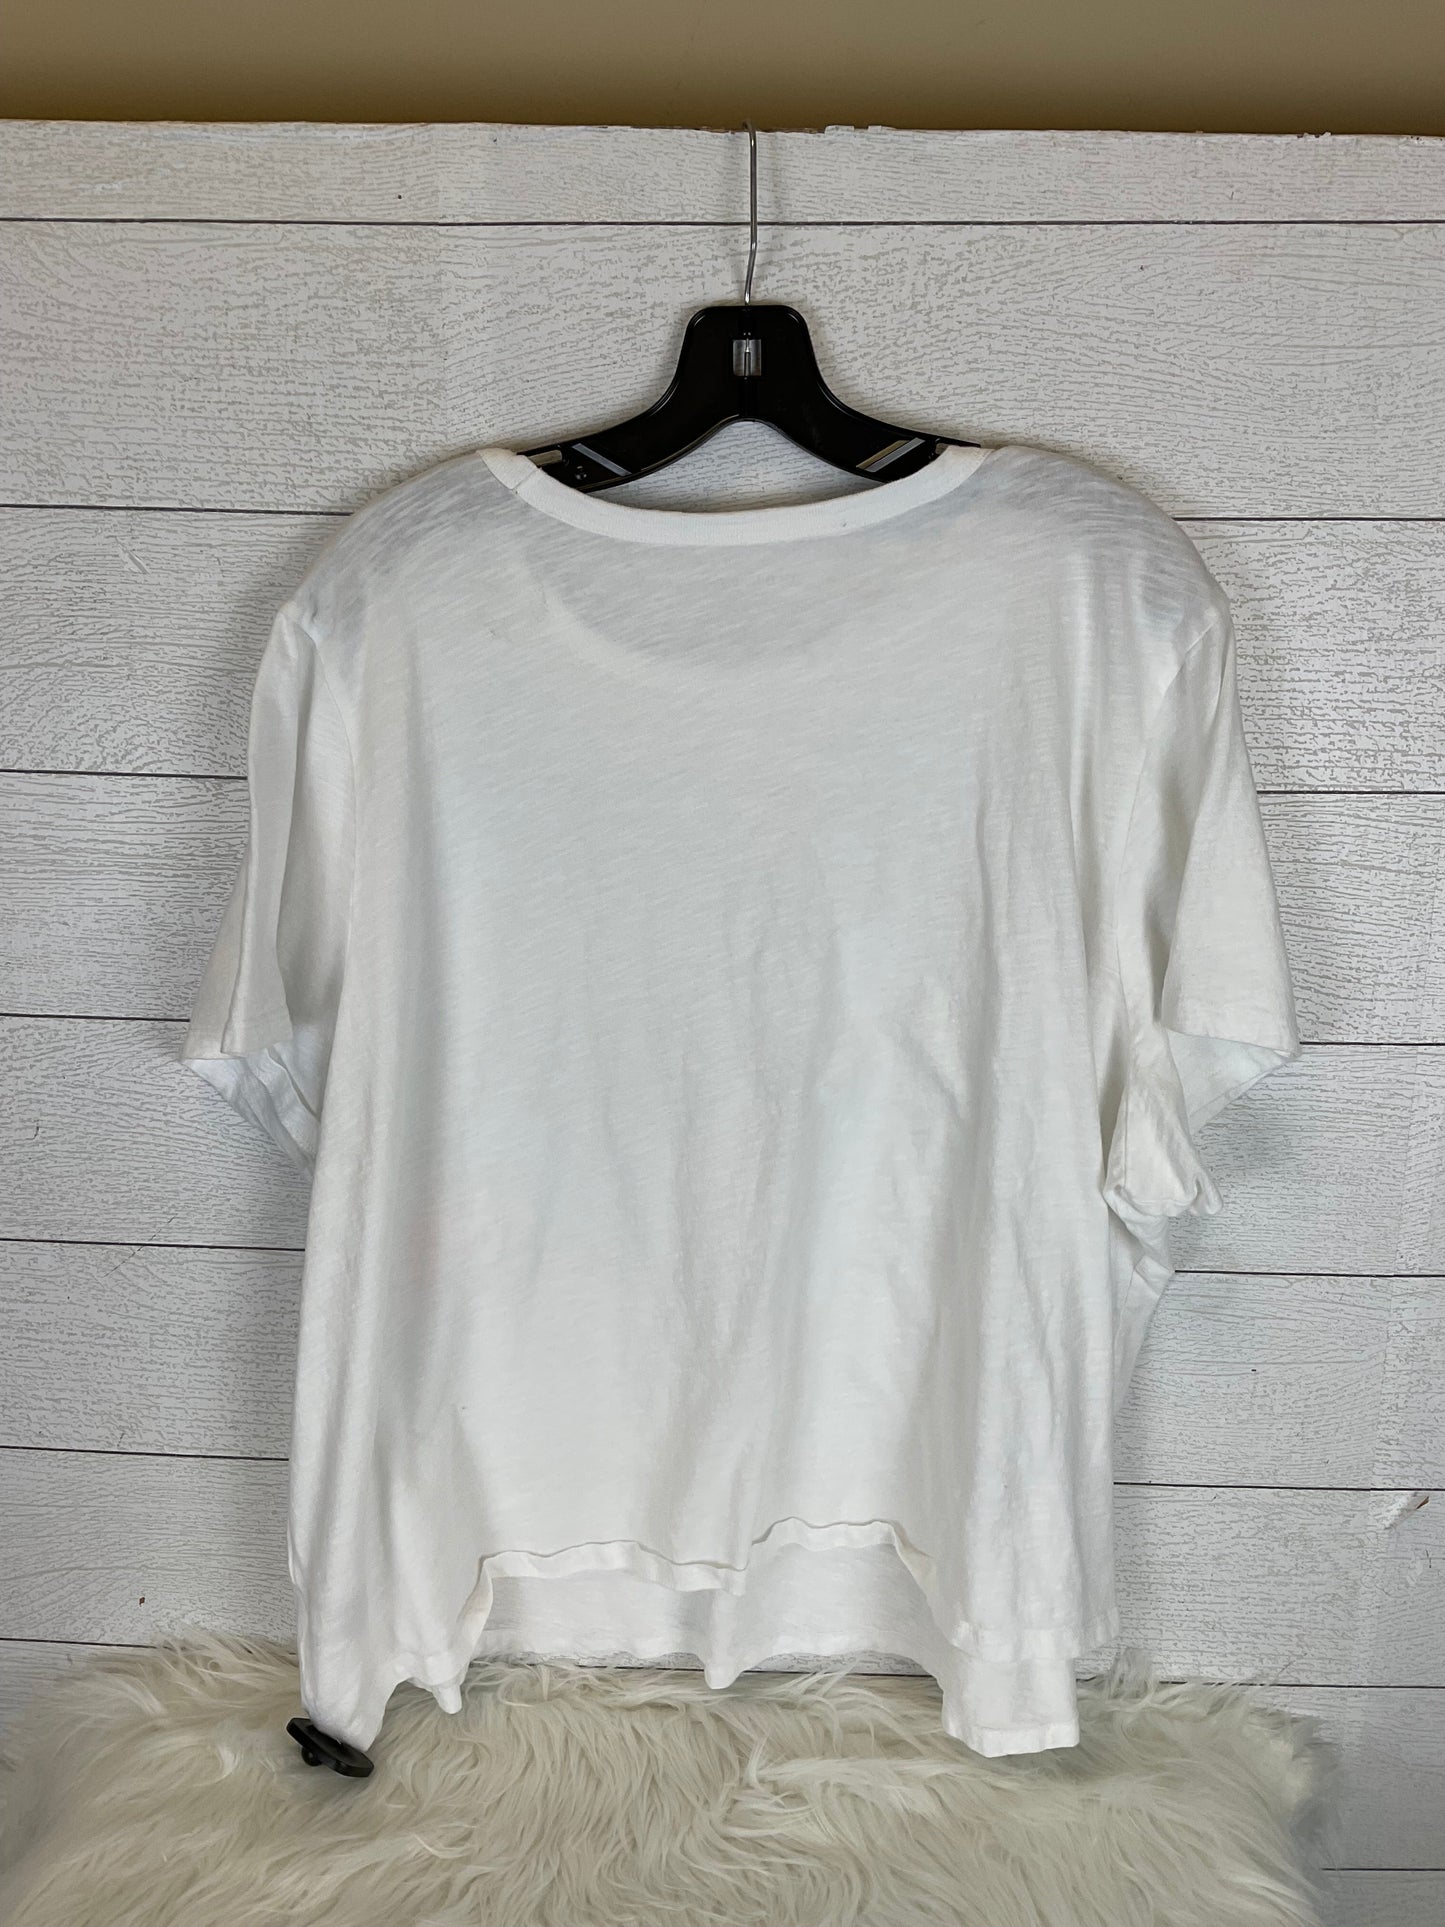 White Top Short Sleeve Old Navy, Size 3x